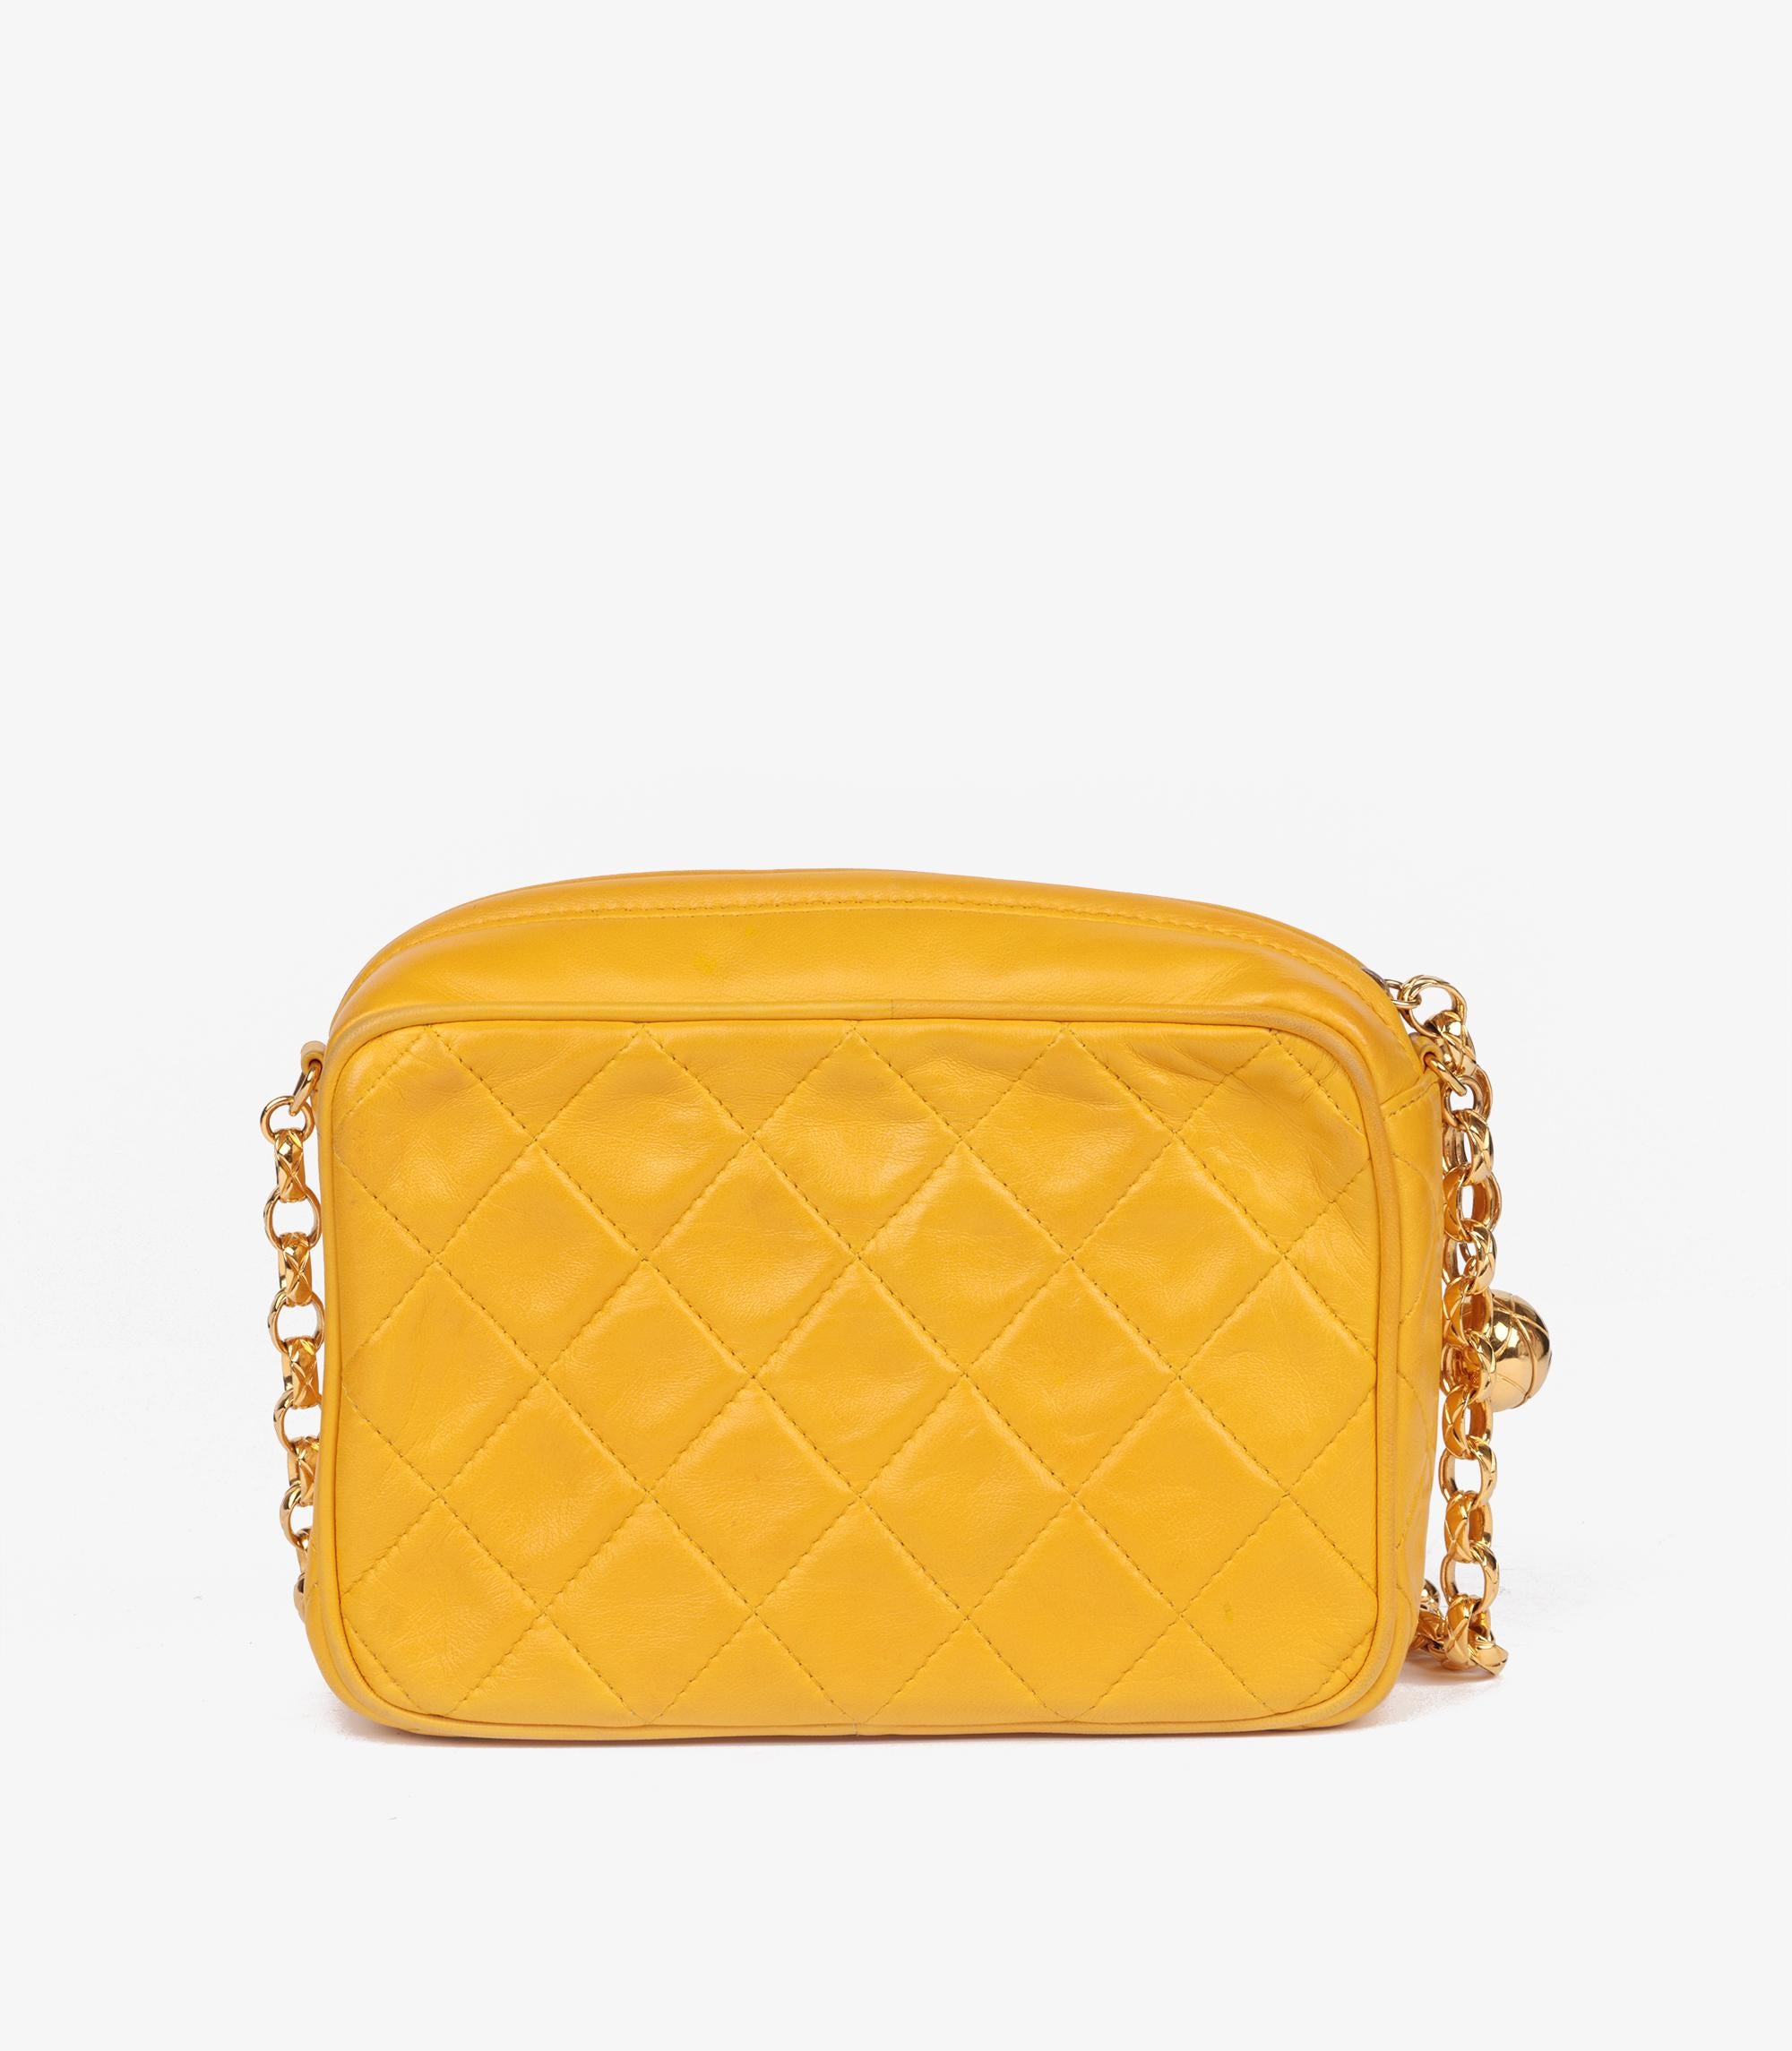 Chanel Yellow Quilted Lambskin Vintage Mini Camera Bag For Sale 2